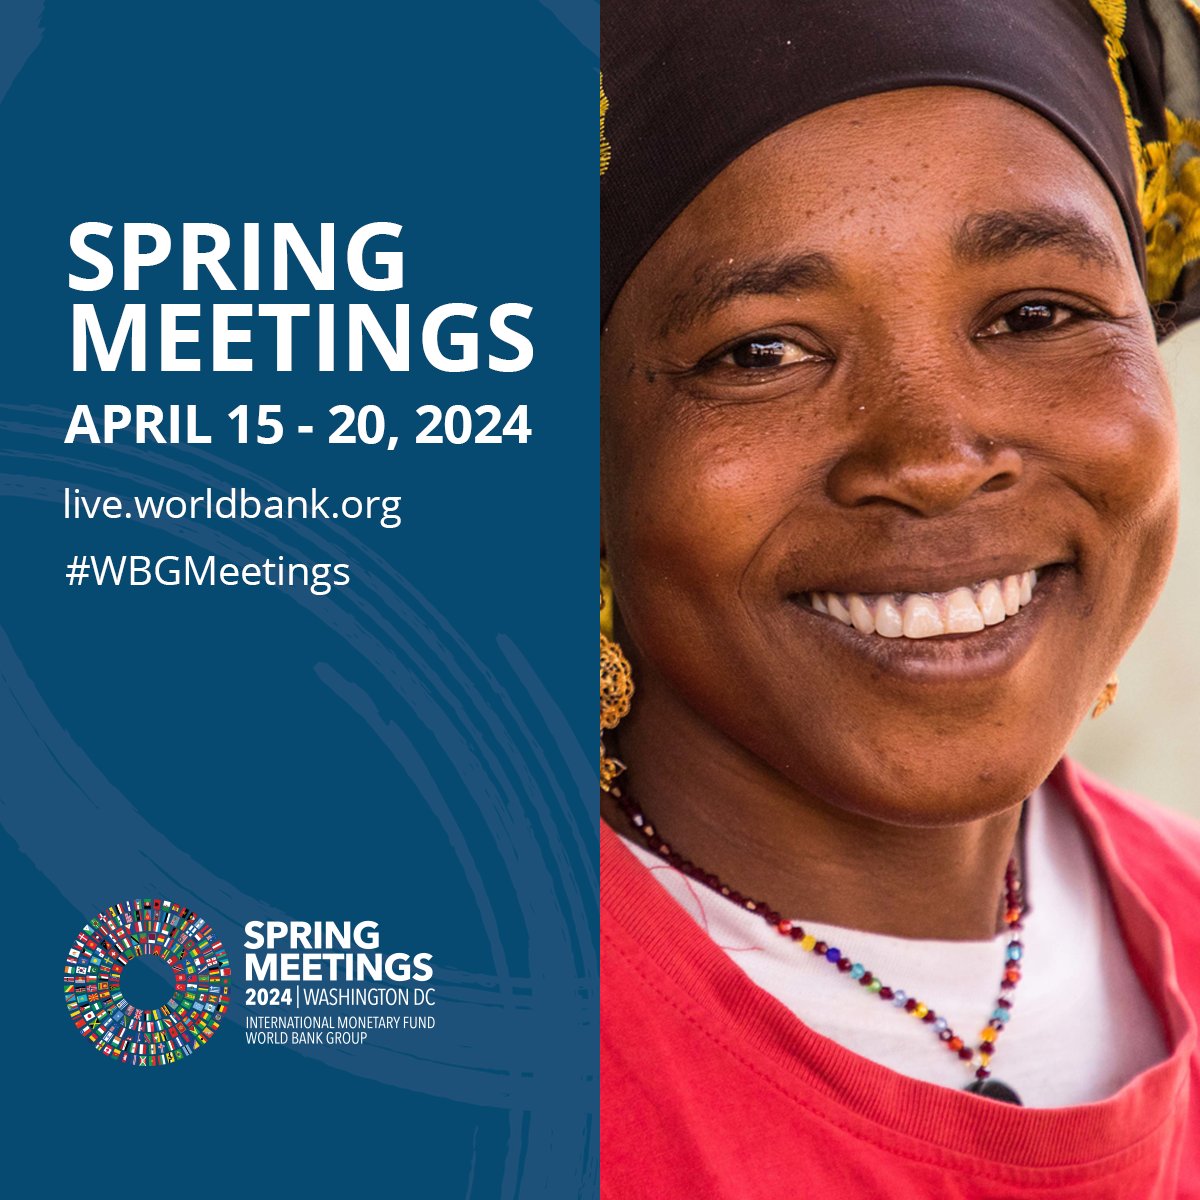 From April 15-20, the @WorldBank Group gathers global leaders, civil society, private sector & academia to discuss the challenges facing global development. You’re invited to join this year’s #WBGMeetings. Sign up to join our events online: wrld.bg/FRfO50ReEym